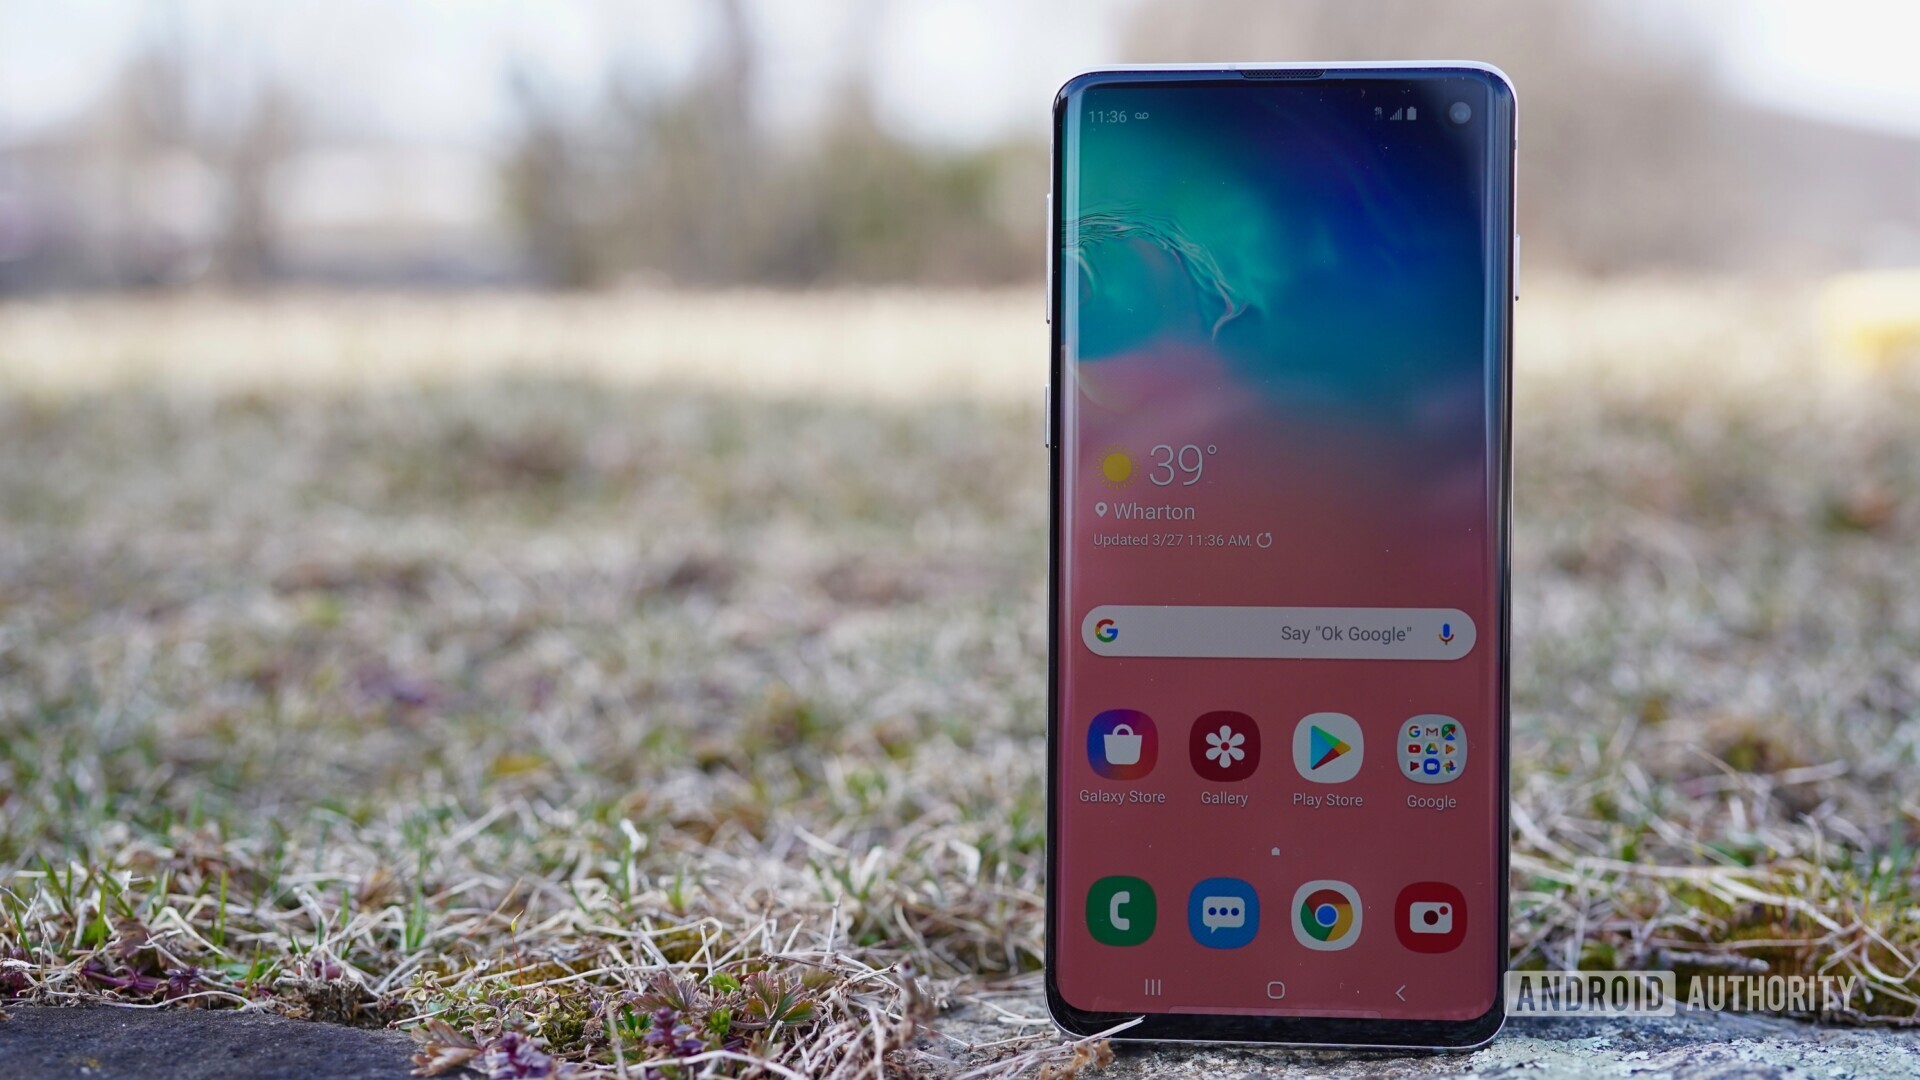 Fron side of the Samsung Glaxy S10 standing upright in a field.